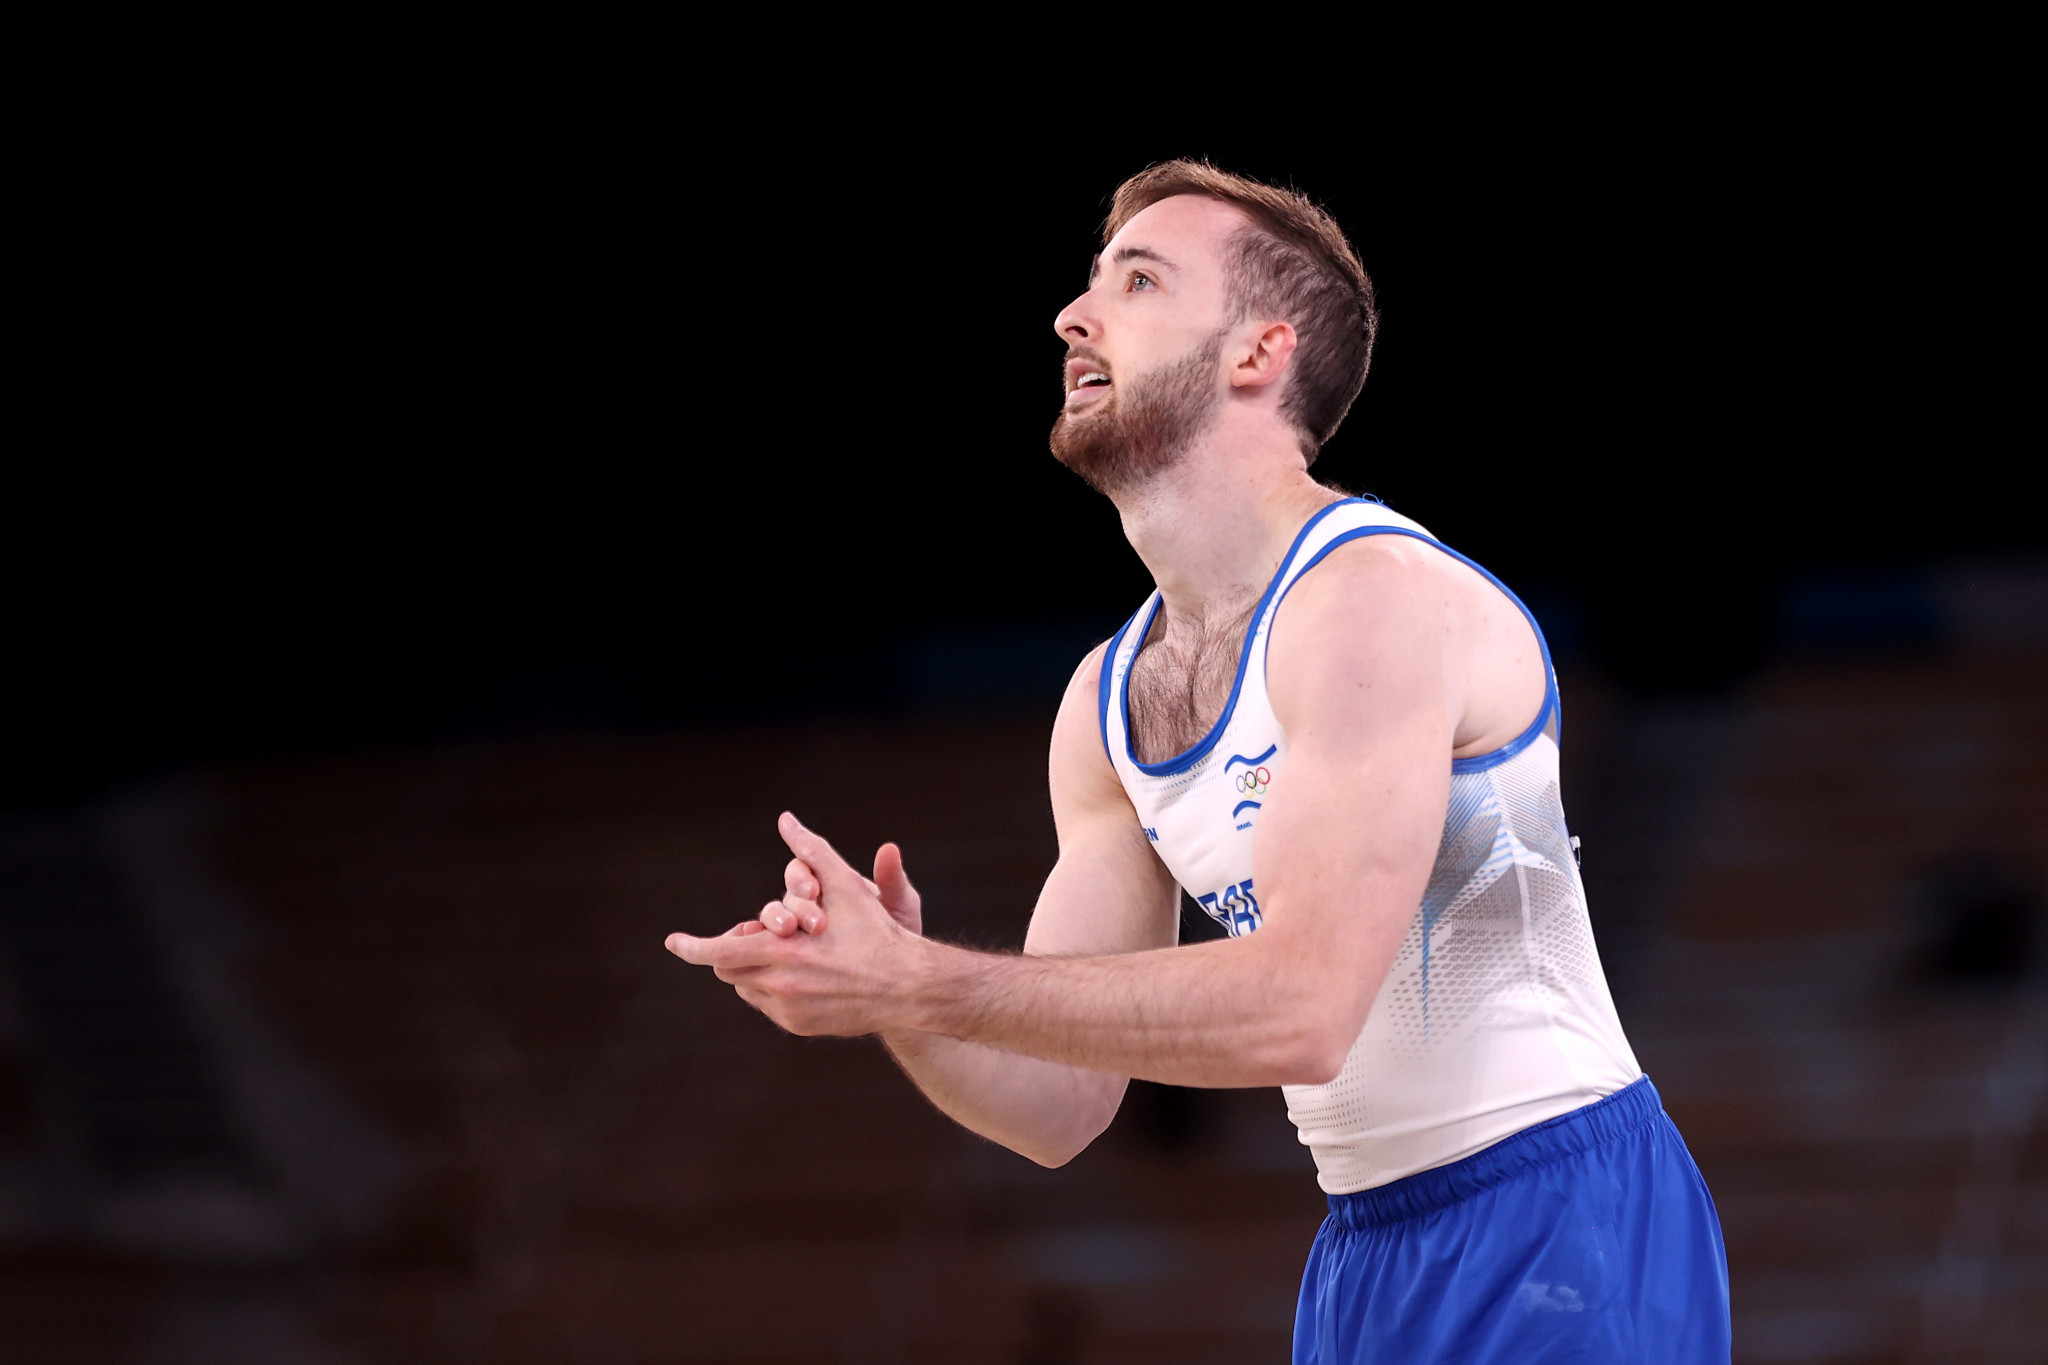 Israel's floor exercise Olympic champion Artem Dolgopyat progressed through two qualifiers at the FIG World Cup in Doha ©Getty Images 